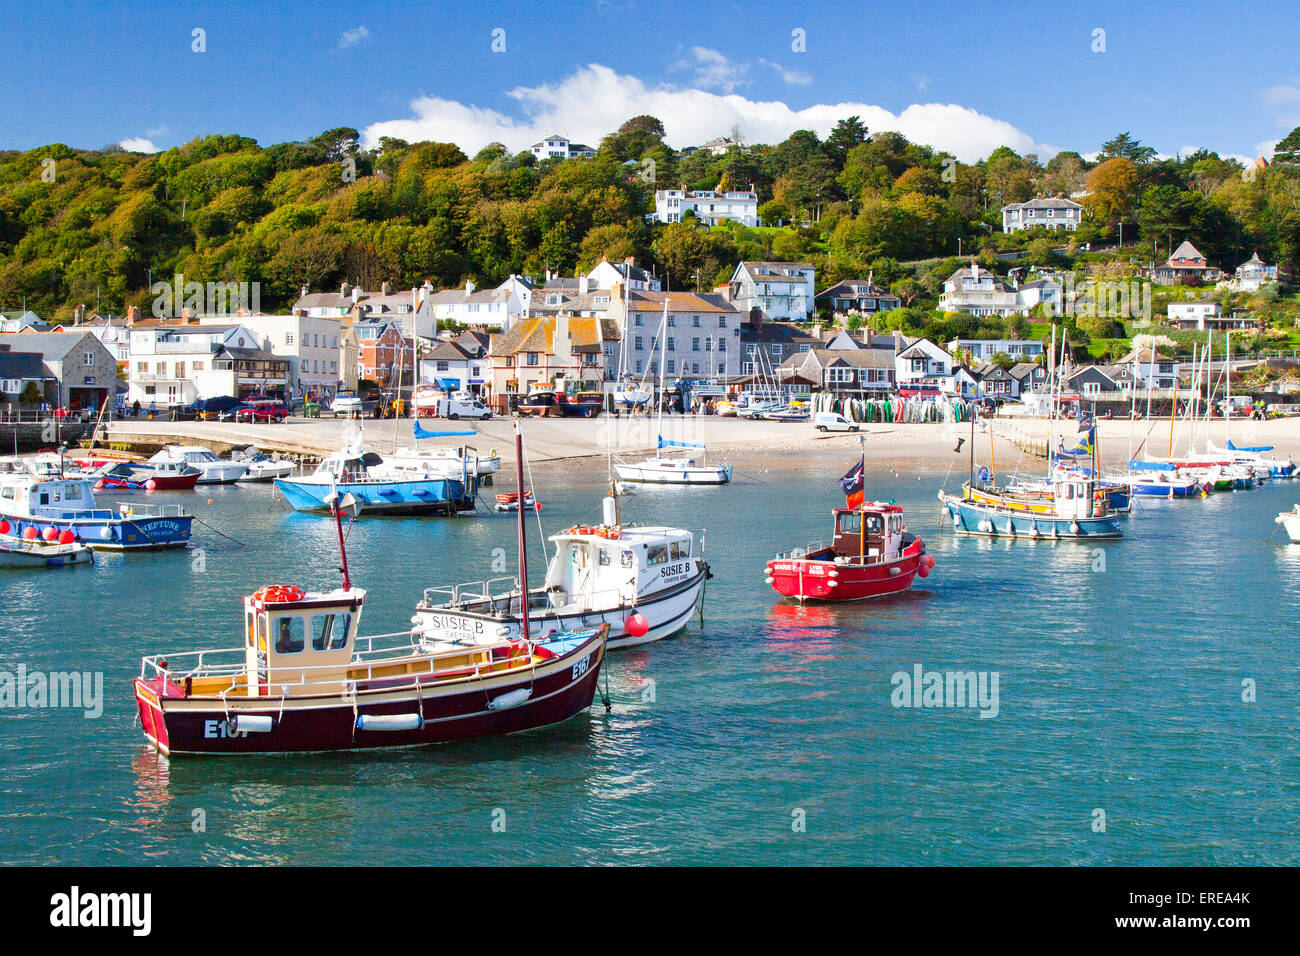 An assortment of colourful boats in Lyme Regis harbour on the Jurassic Coast, Dorset, England, UK Stock Photo